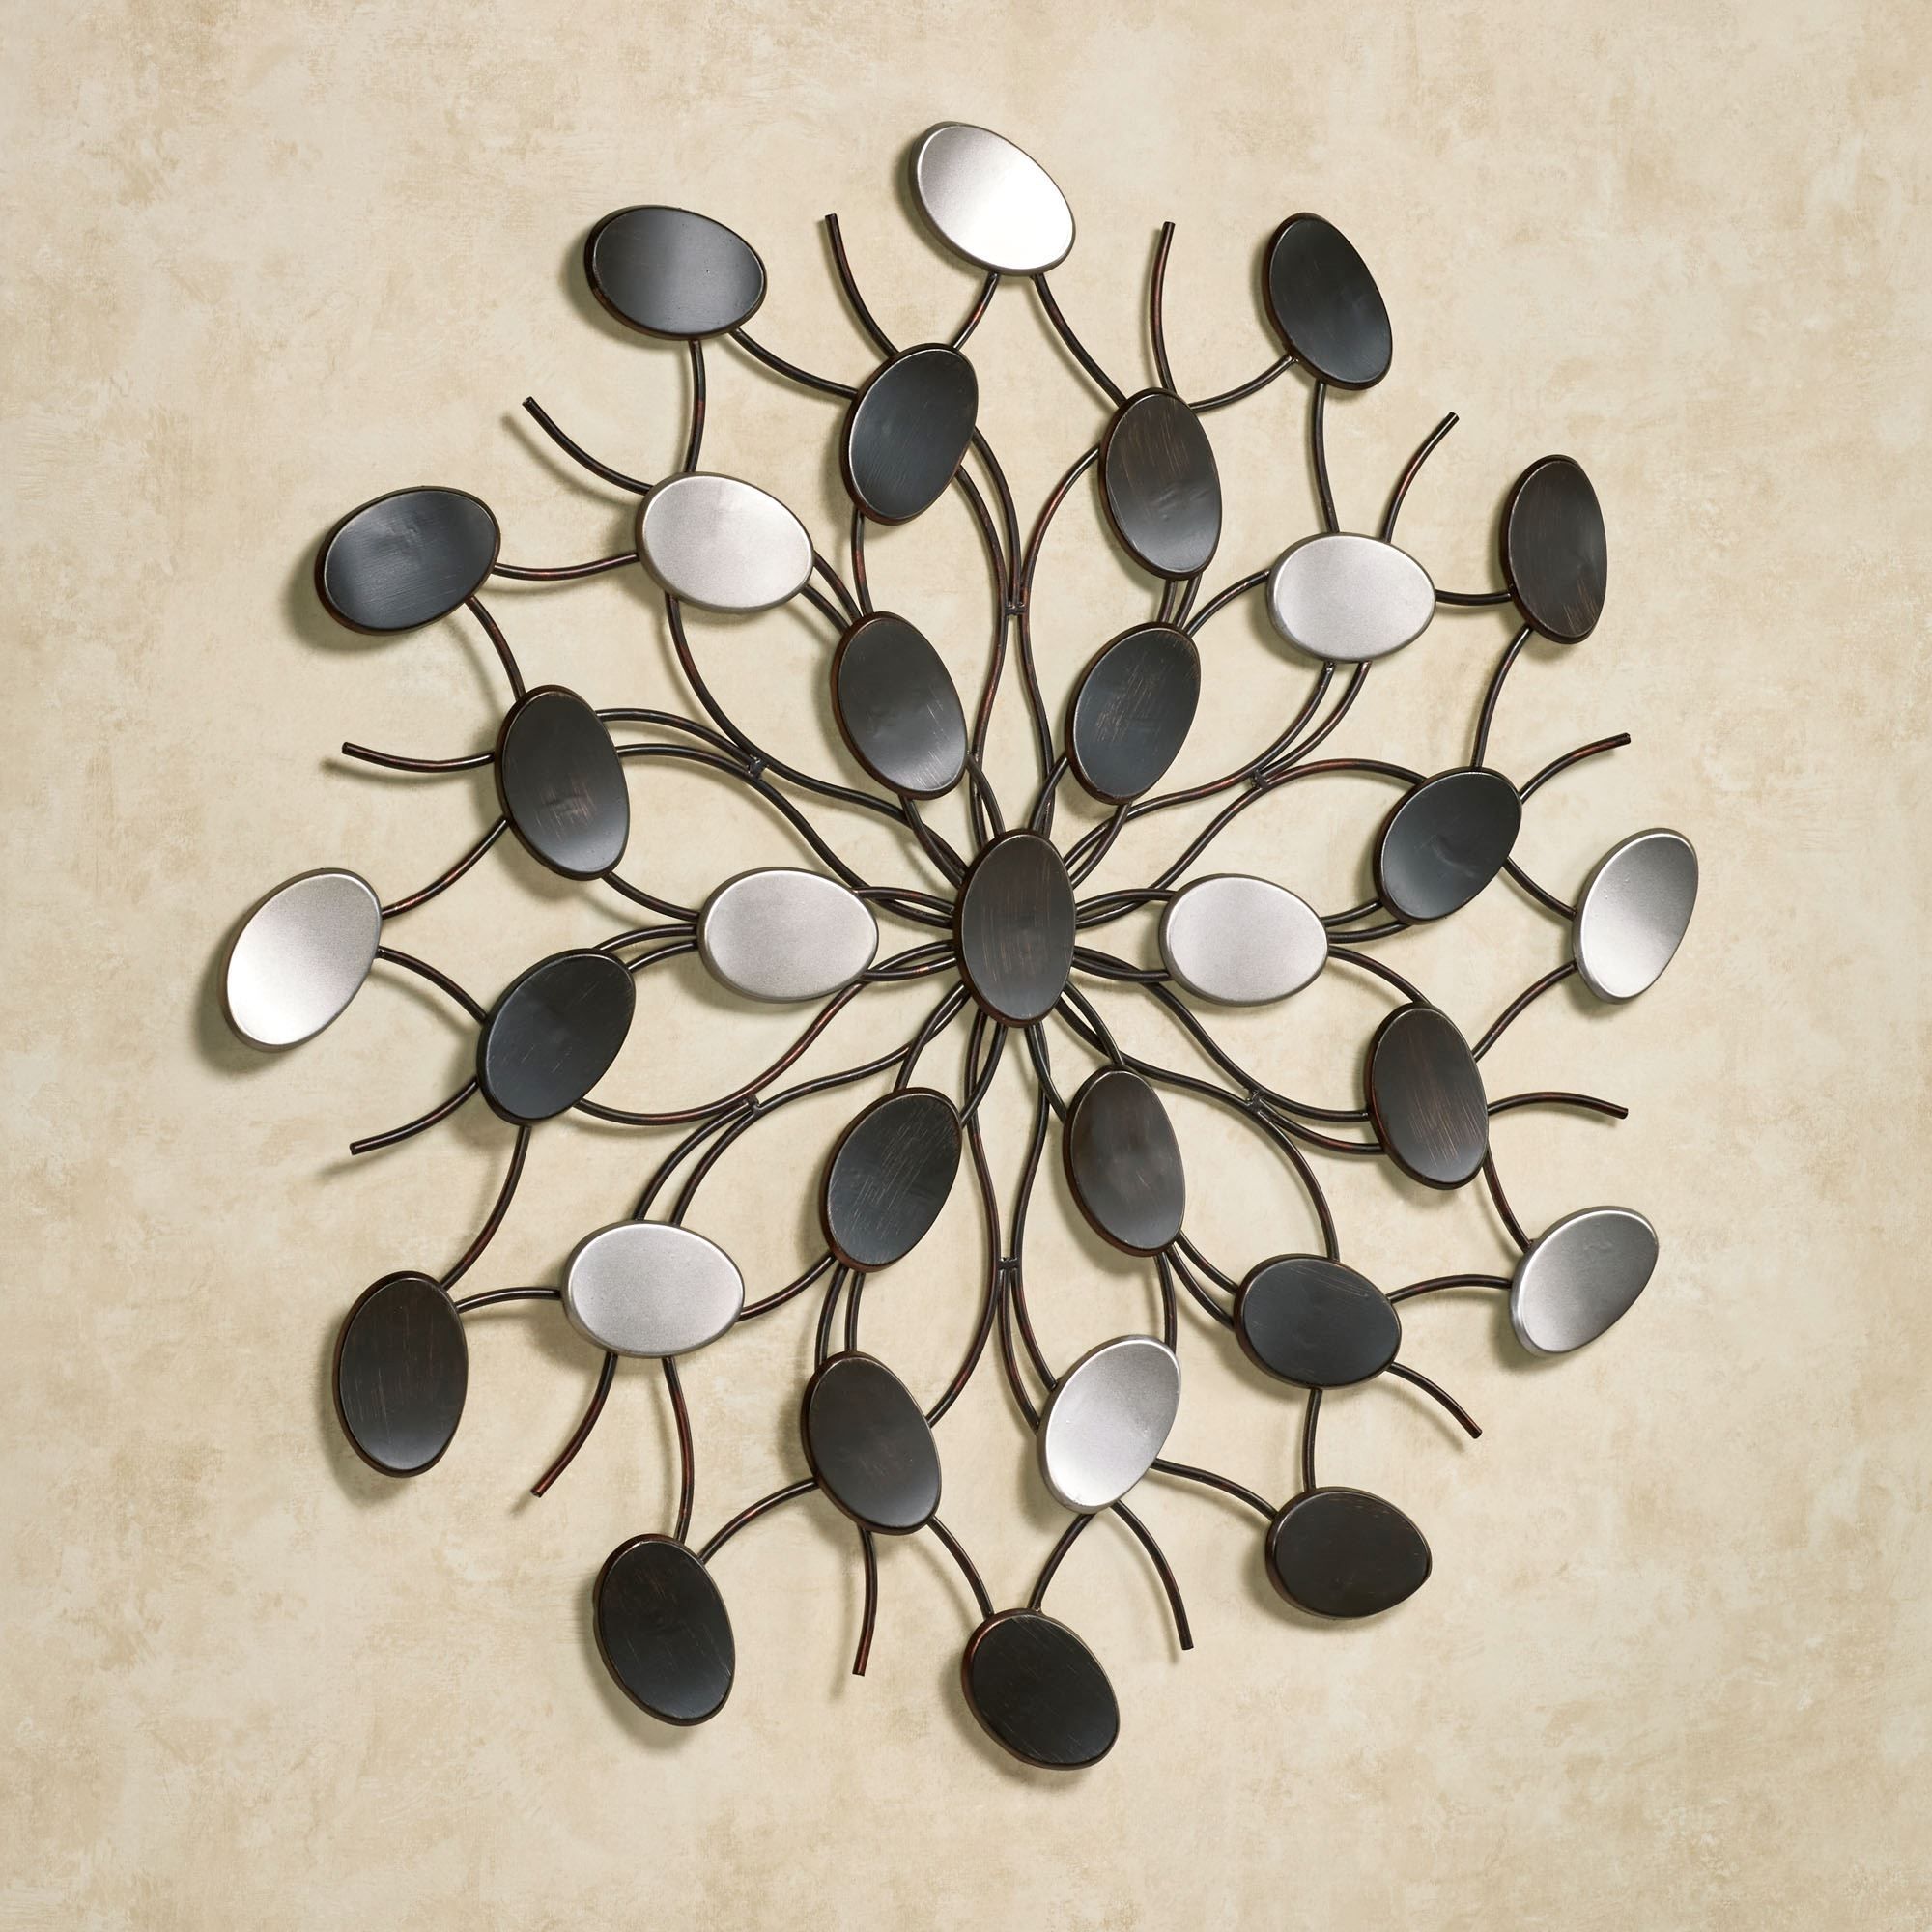 Radiant Petals Abstract Metal Wall Art Throughout Most Recently Released Abstract Flower Metal Wall Art (View 7 of 20)